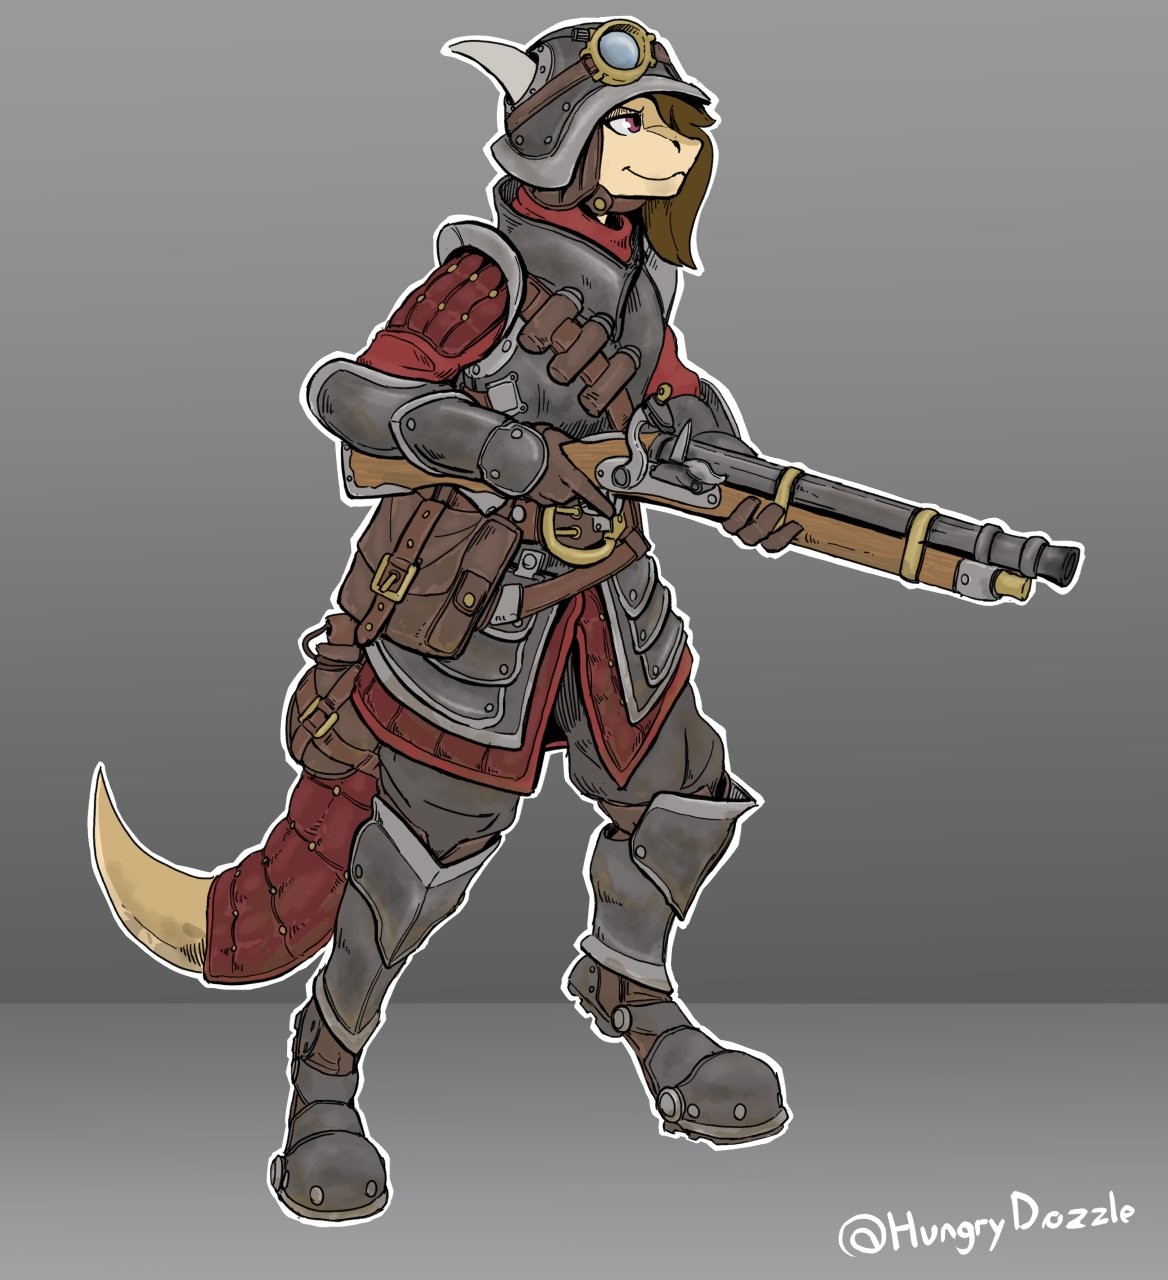 tacky Penguin. .. Always nice to see a combat ready kobold 